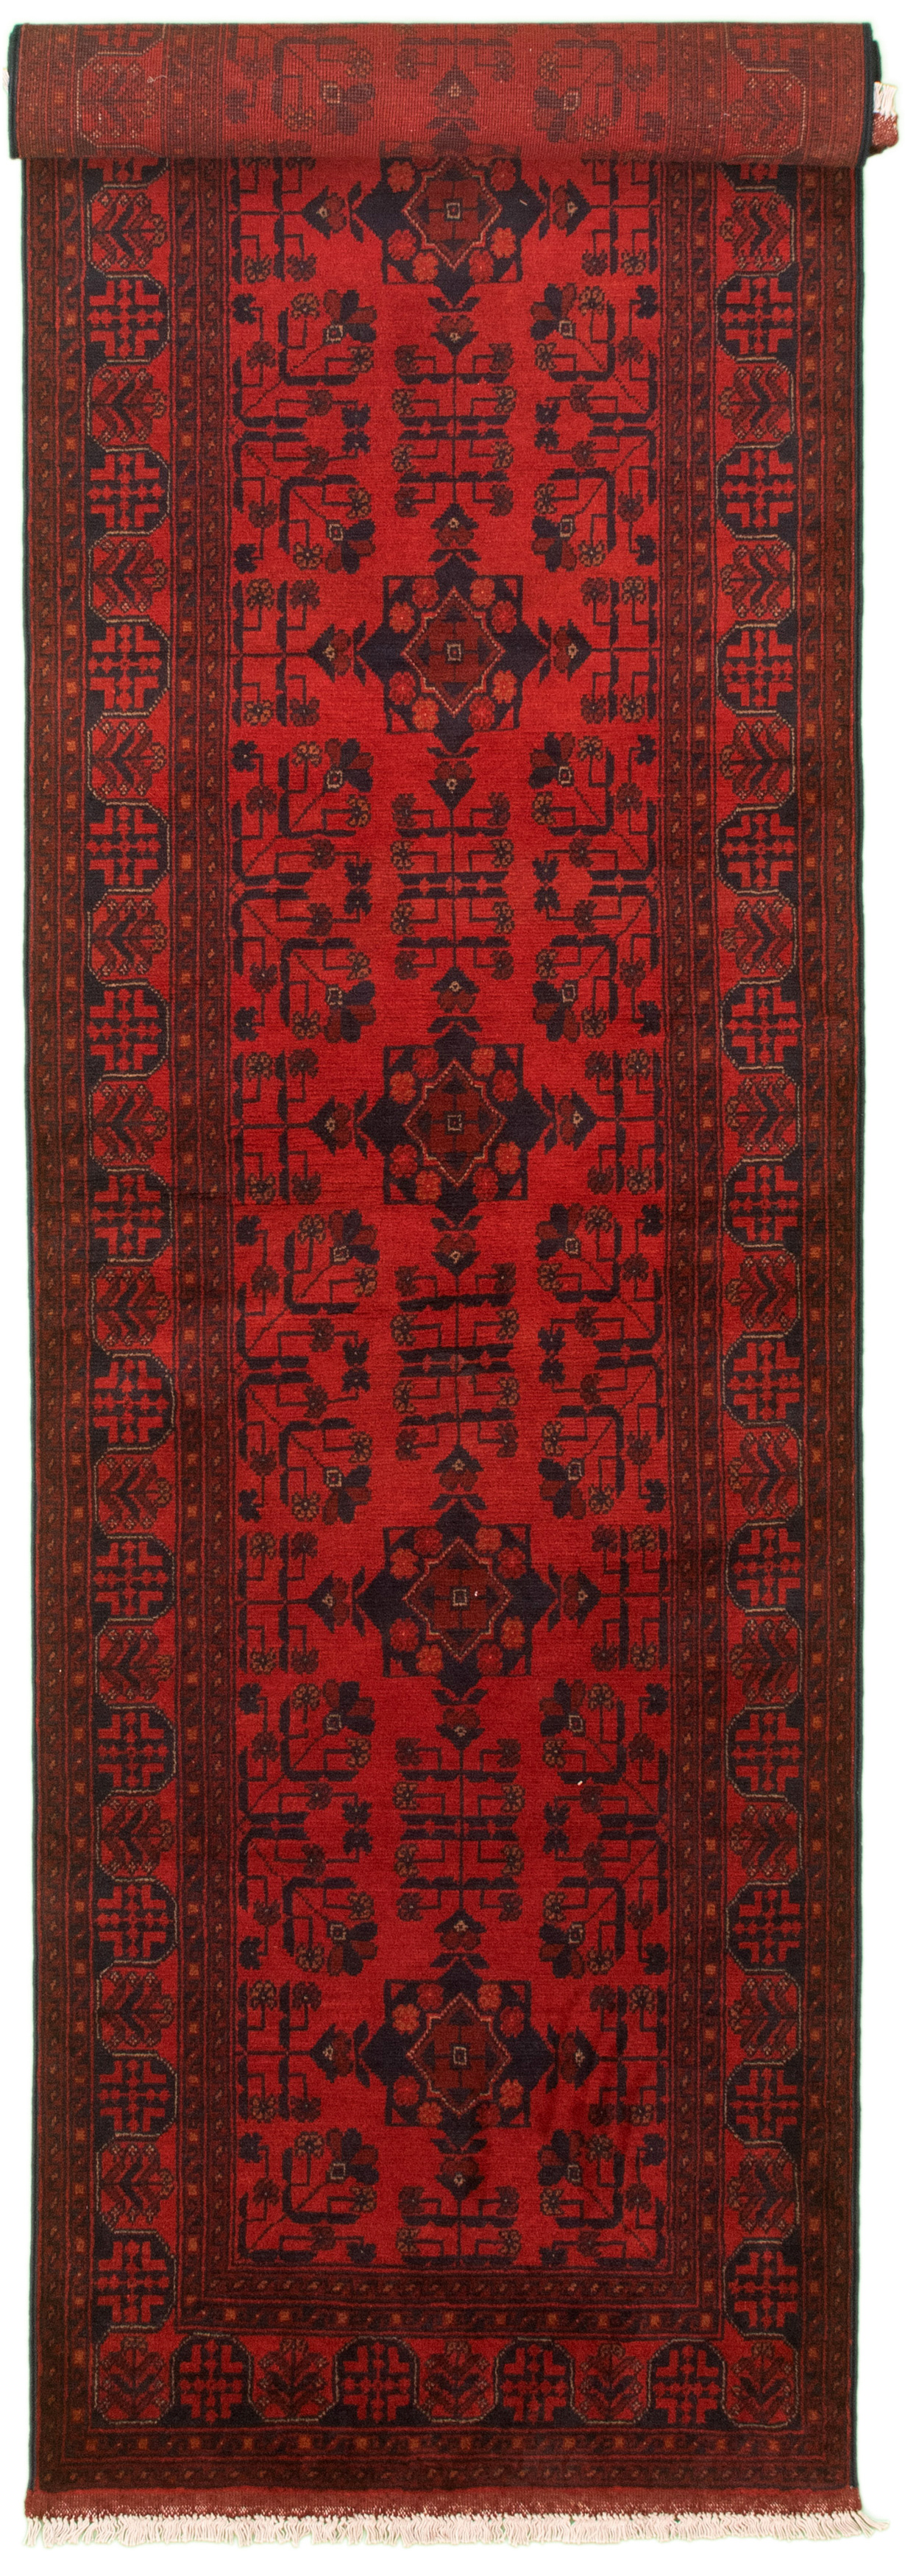 Hand-knotted Finest Khal Mohammadi Red Wool Rug 2'9" x 12'9"  Size: 2'9" x 12'9"  